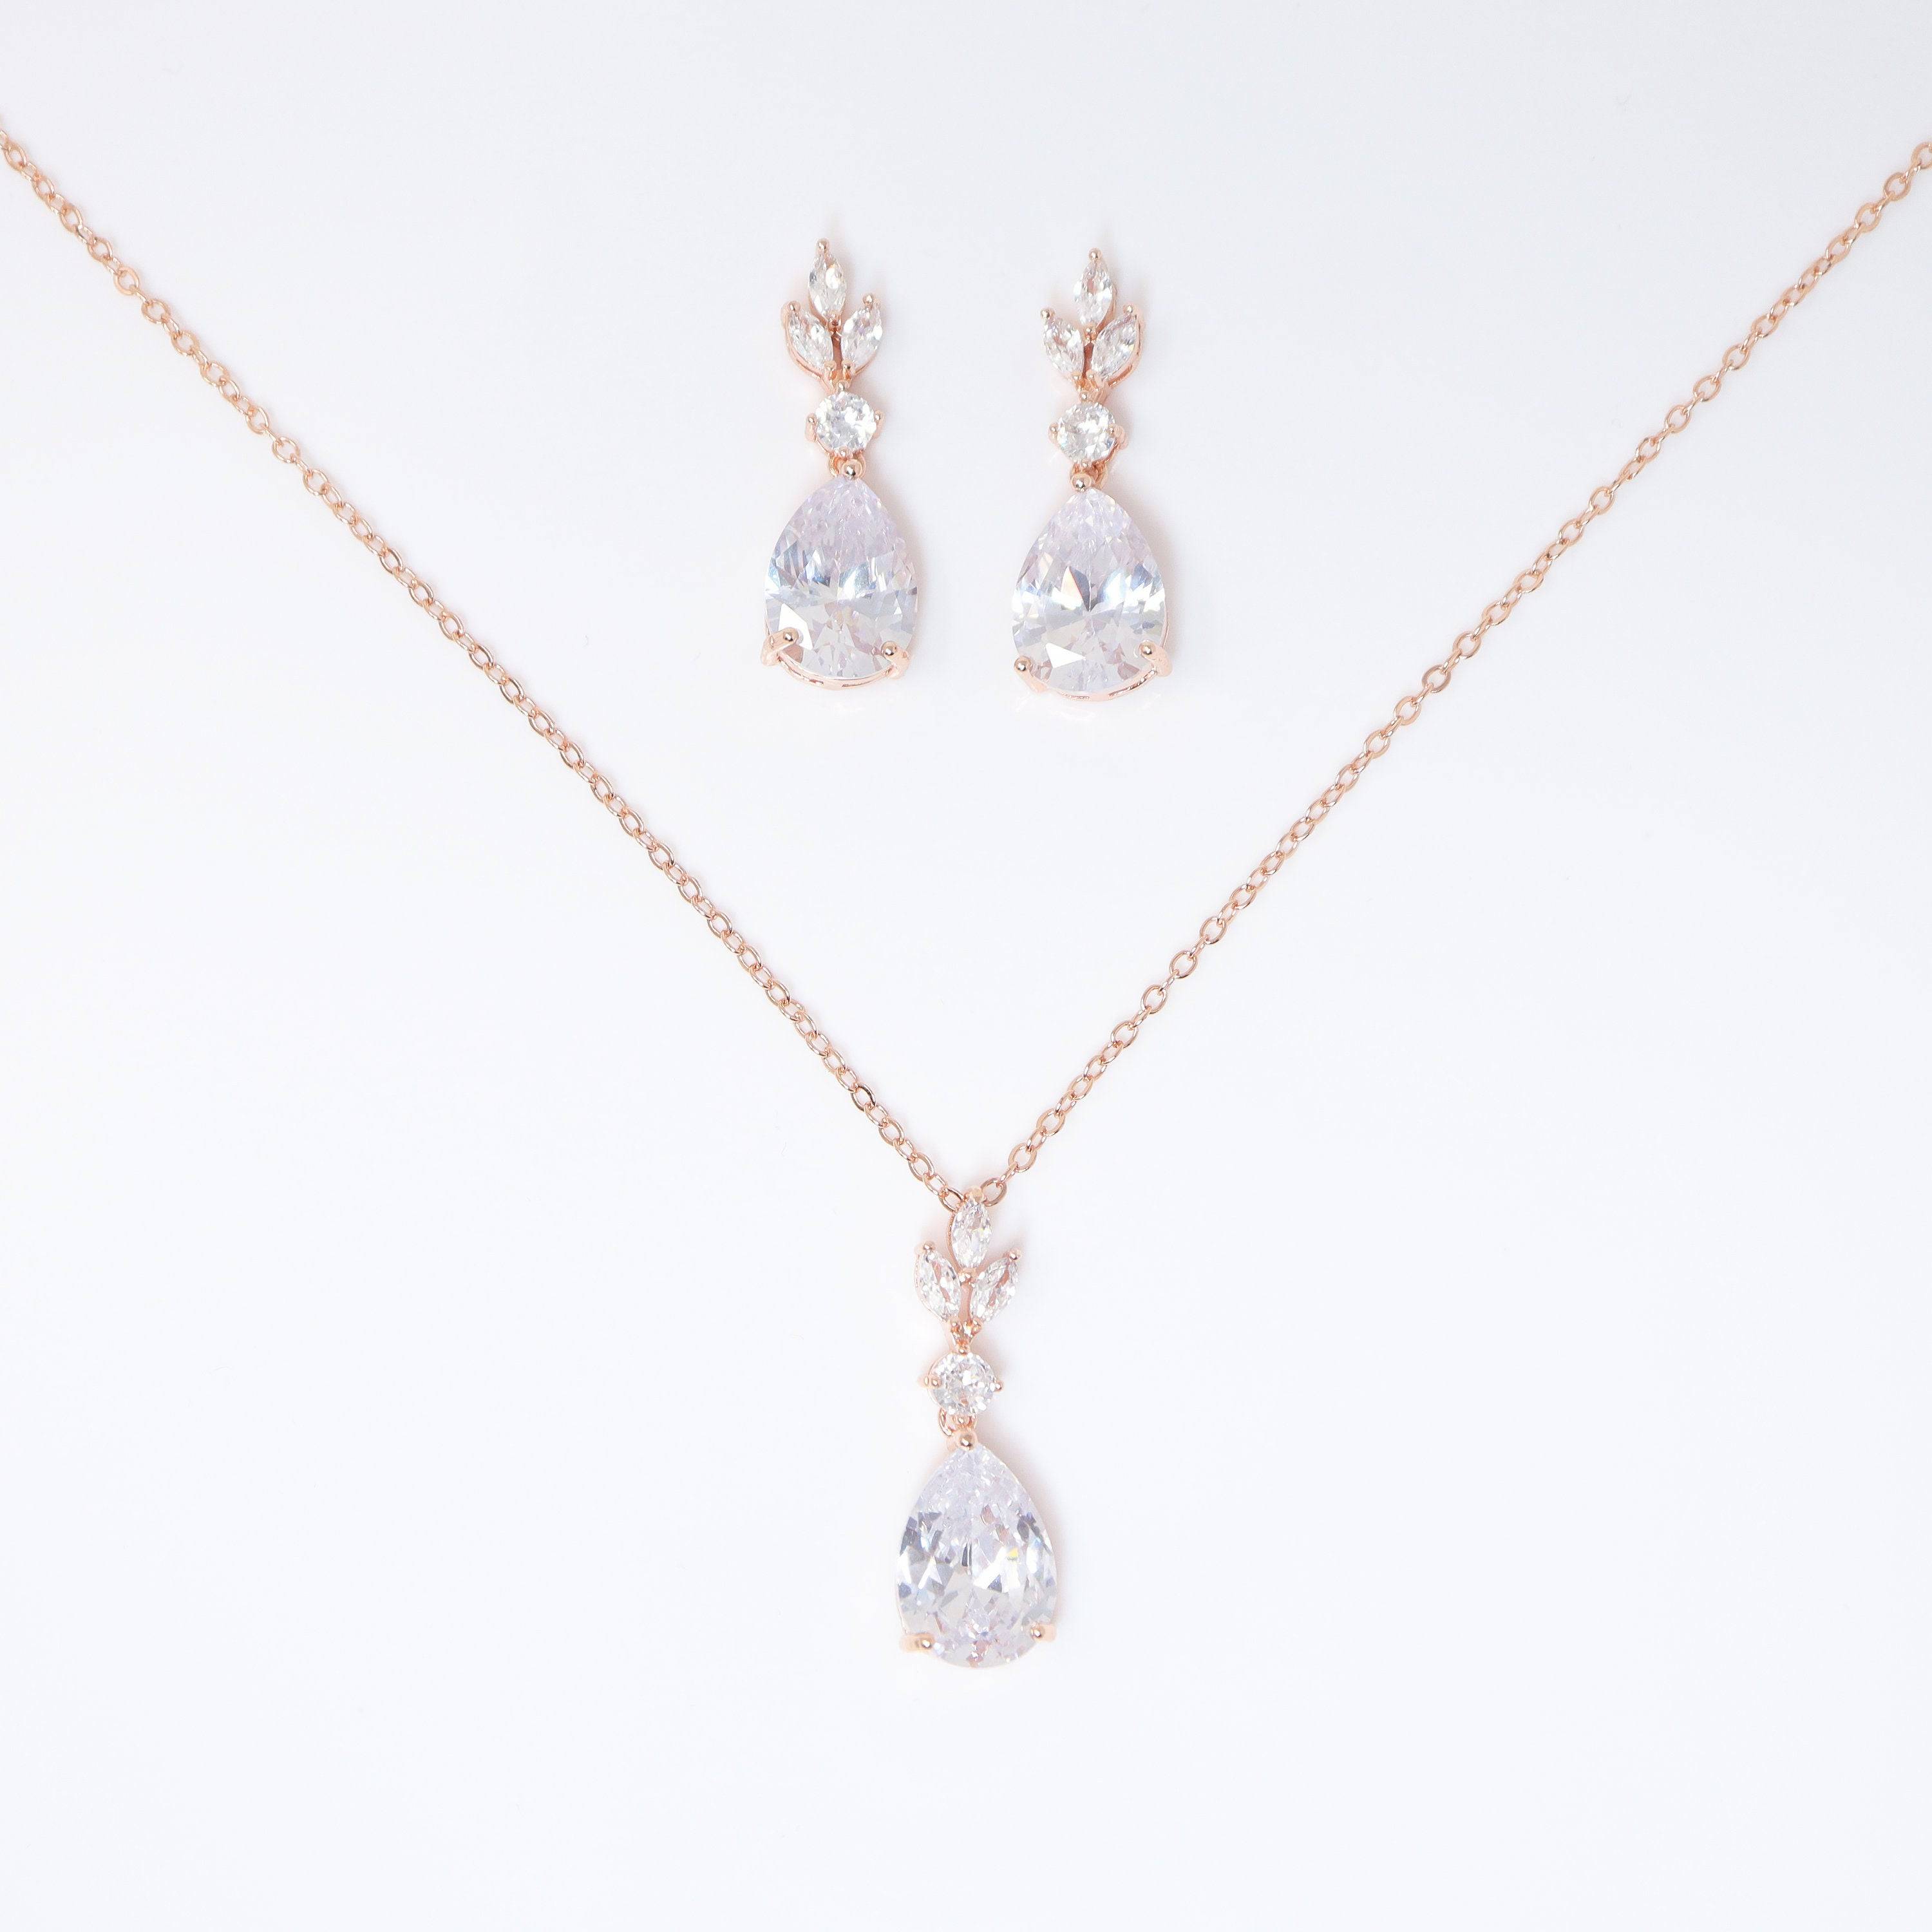 22K Gold Necklace Set with long Drop Earrings - NS-4938